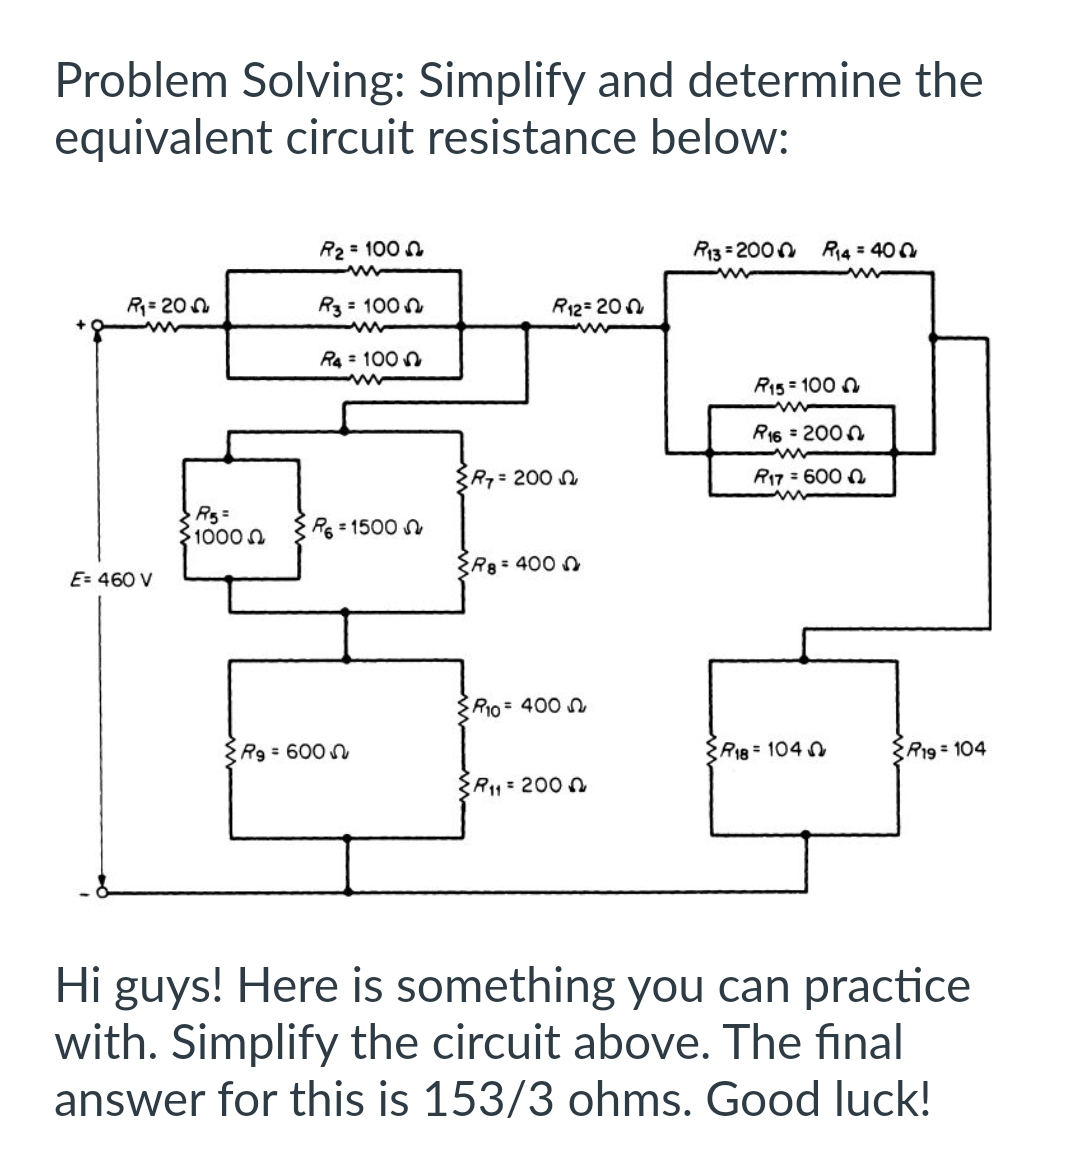 Problem Solving: Simplify and determine the
equivalent circuit resistance below:
R₁=200
E= 460 V
R5=
1000
R₂ = 1000
R3 = 1000
R4 = 100
R6 = 1500
Rg = 600
R7 = 200
R12= 200
R8 = 4000
R10 = 400
{R₁1 = 200
R13=2000 R₁4 = 400
R15 = 1000
www
R16 = 2000
m
R17 = 6000
R18 = 1040
R19 = 104
Hi guys! Here is something you can practice
with. Simplify the circuit above. The final
answer for this is 153/3 ohms. Good luck!